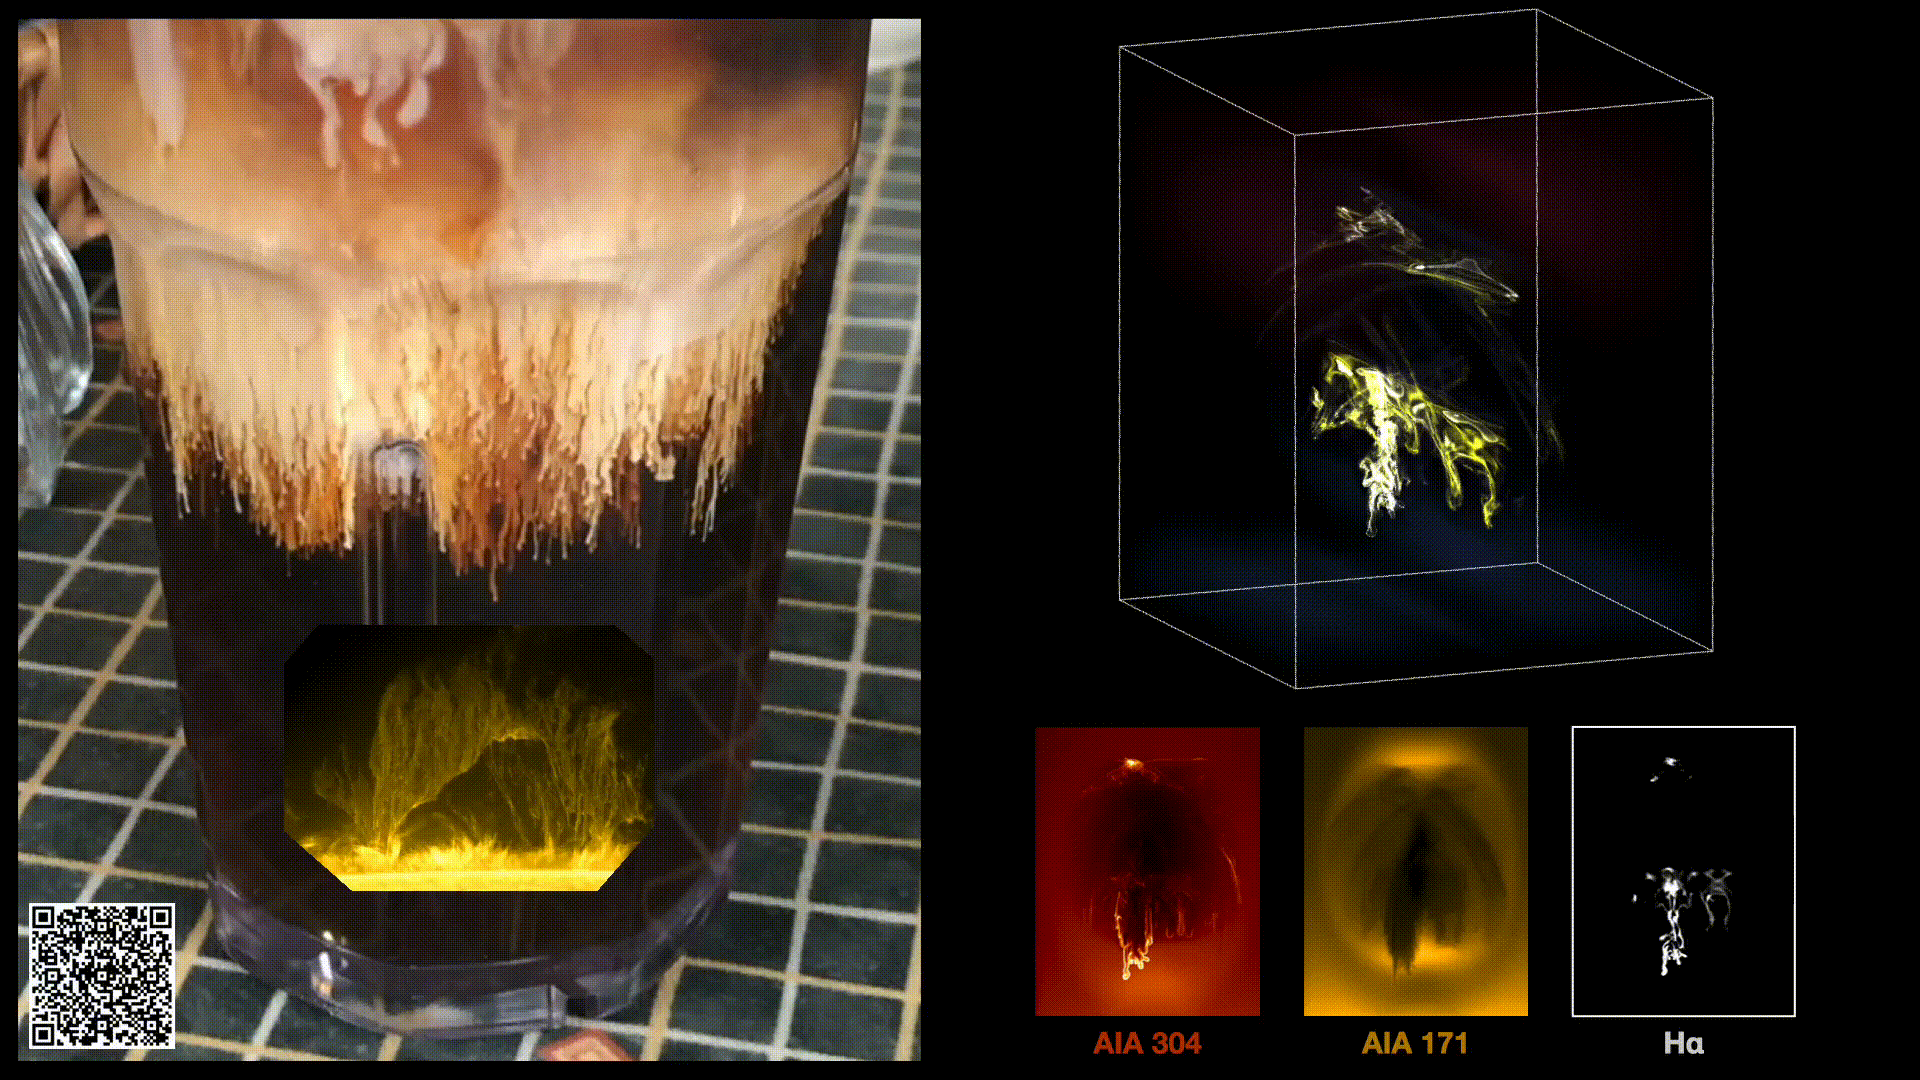 Solar filaments and a milky cup of coffee: how to mix plasma in the solar atmosphere?